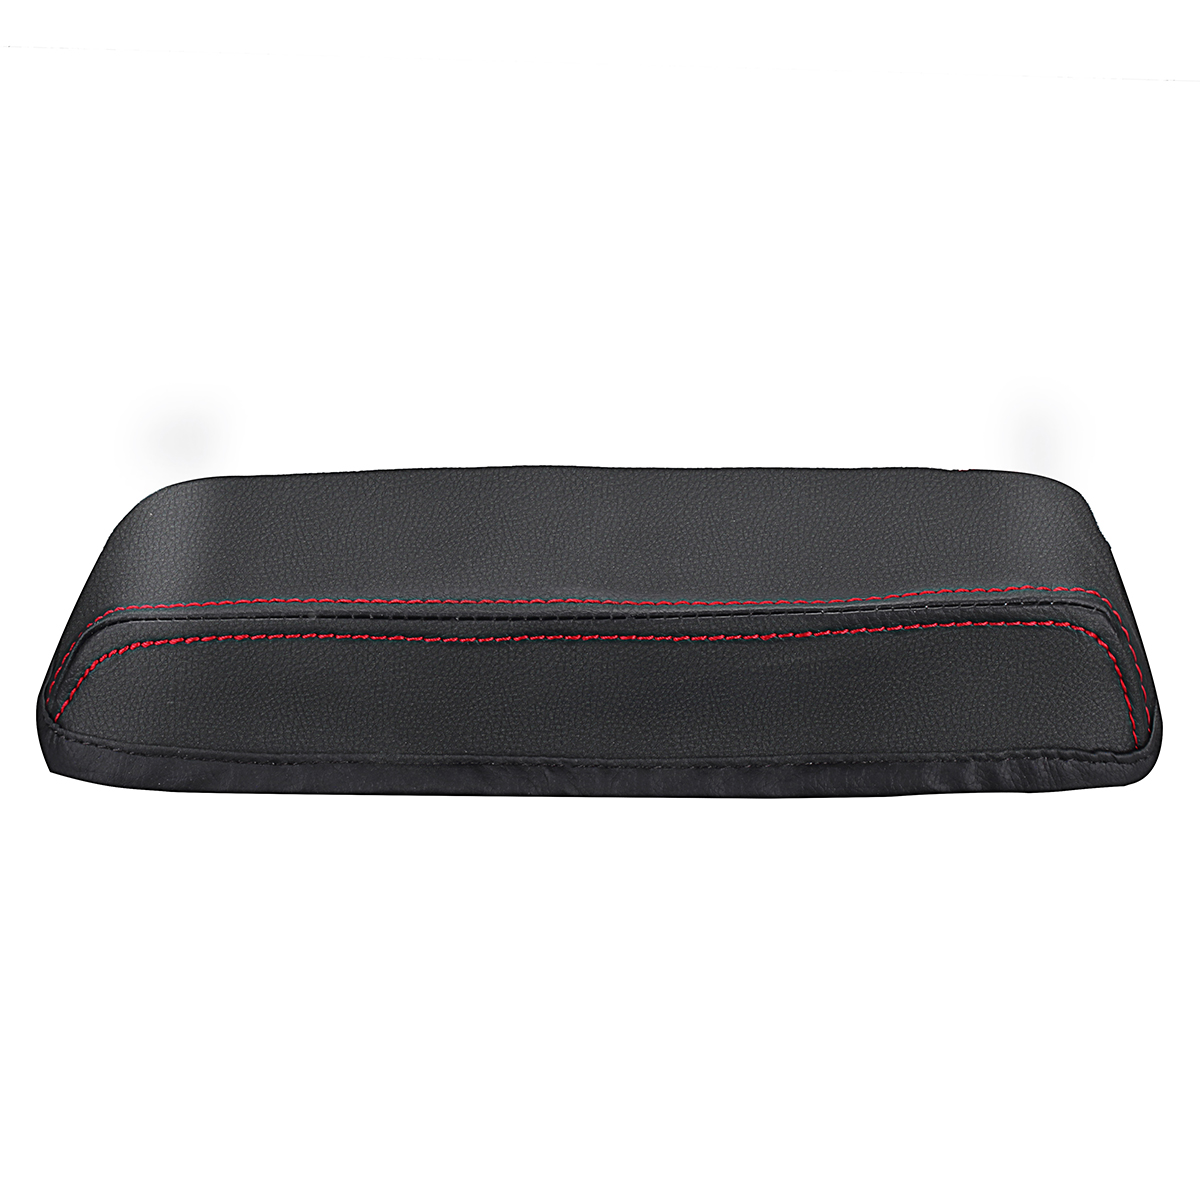 PU Leather Car Center Console Arm Rest Cover Cushion for VW Passat B8 and B8 Variant 2016-2018